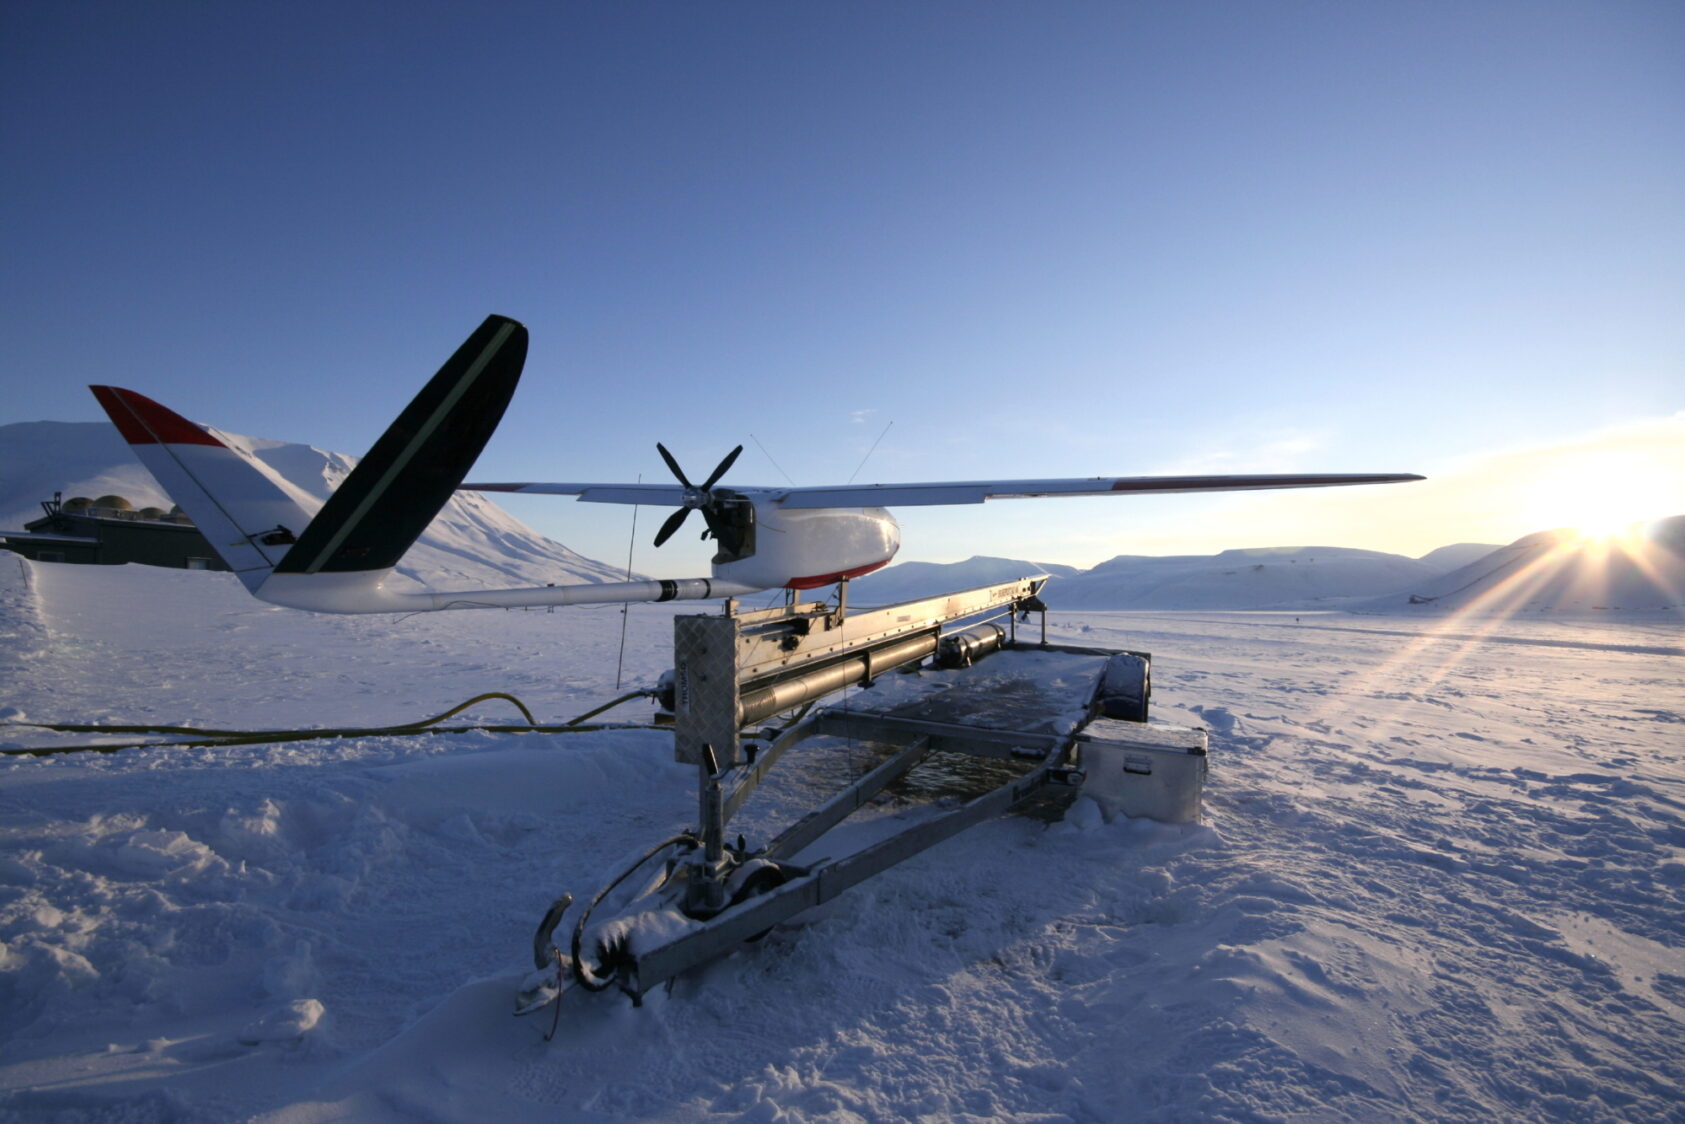 How can Norwegian drones master the Arctic as well as the Danish drones? -